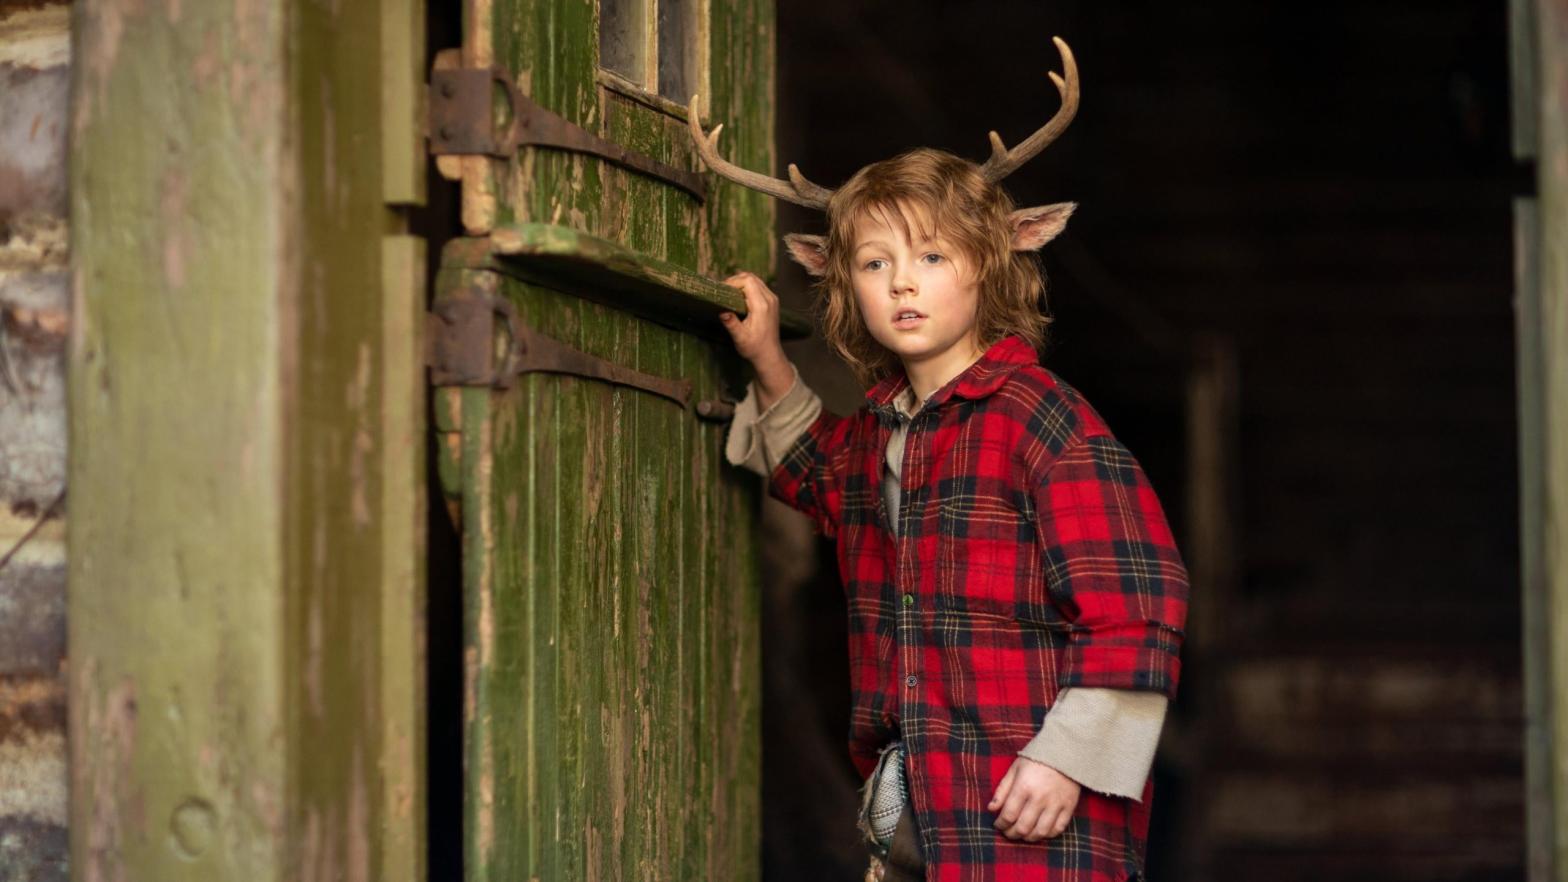 Sweet Tooth's Christian Convery as the deer-boy hybrid Gus. (Image: Kirsty Griffin/Netflix)